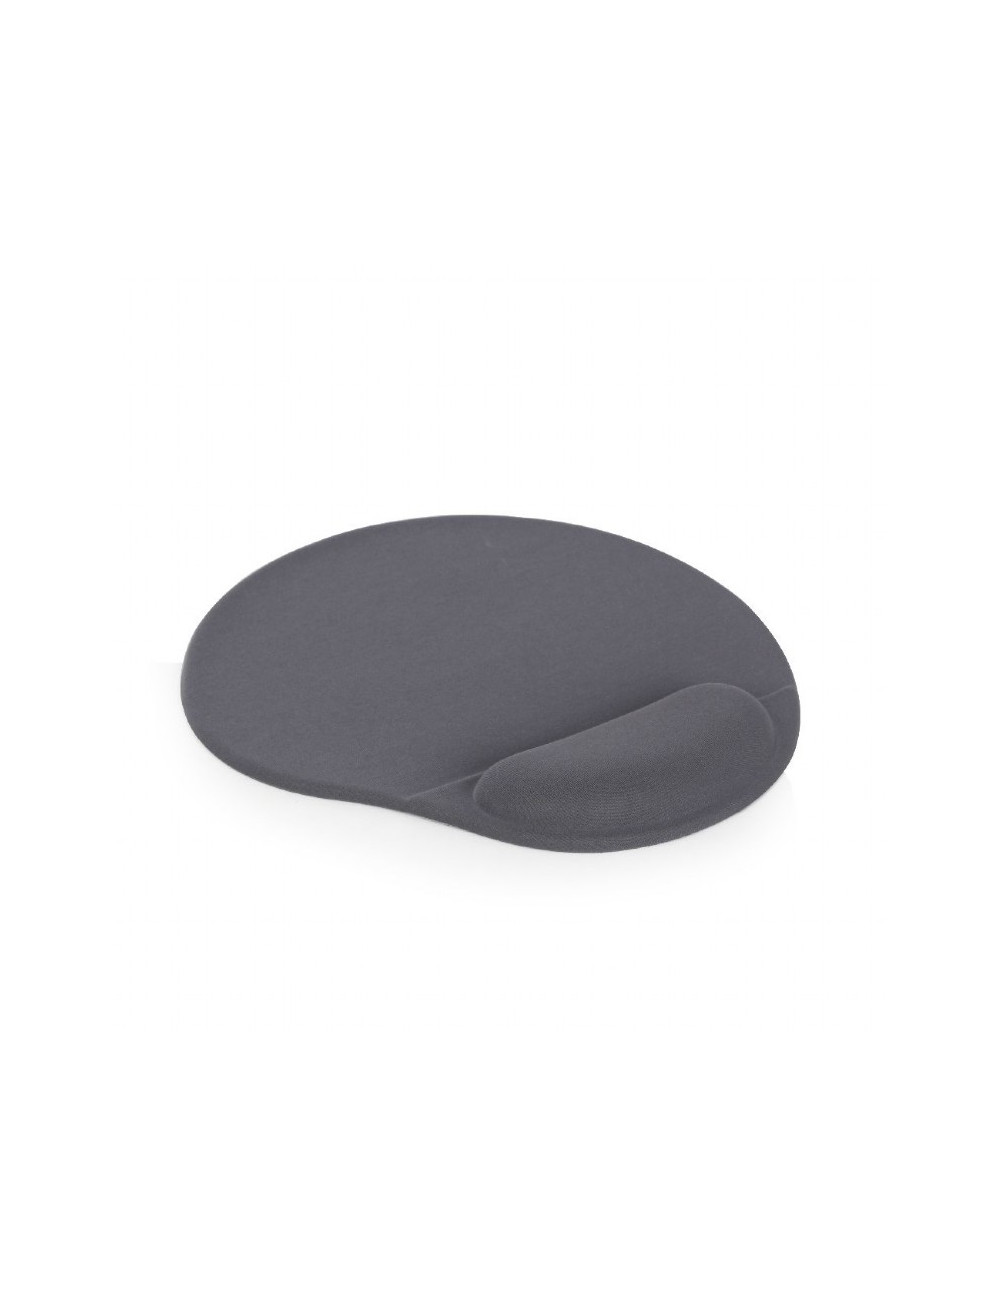 Gembird MP-GEL-GR Gel mouse pad with wrist support, grey Comfortable Grey, Gel mouse pad